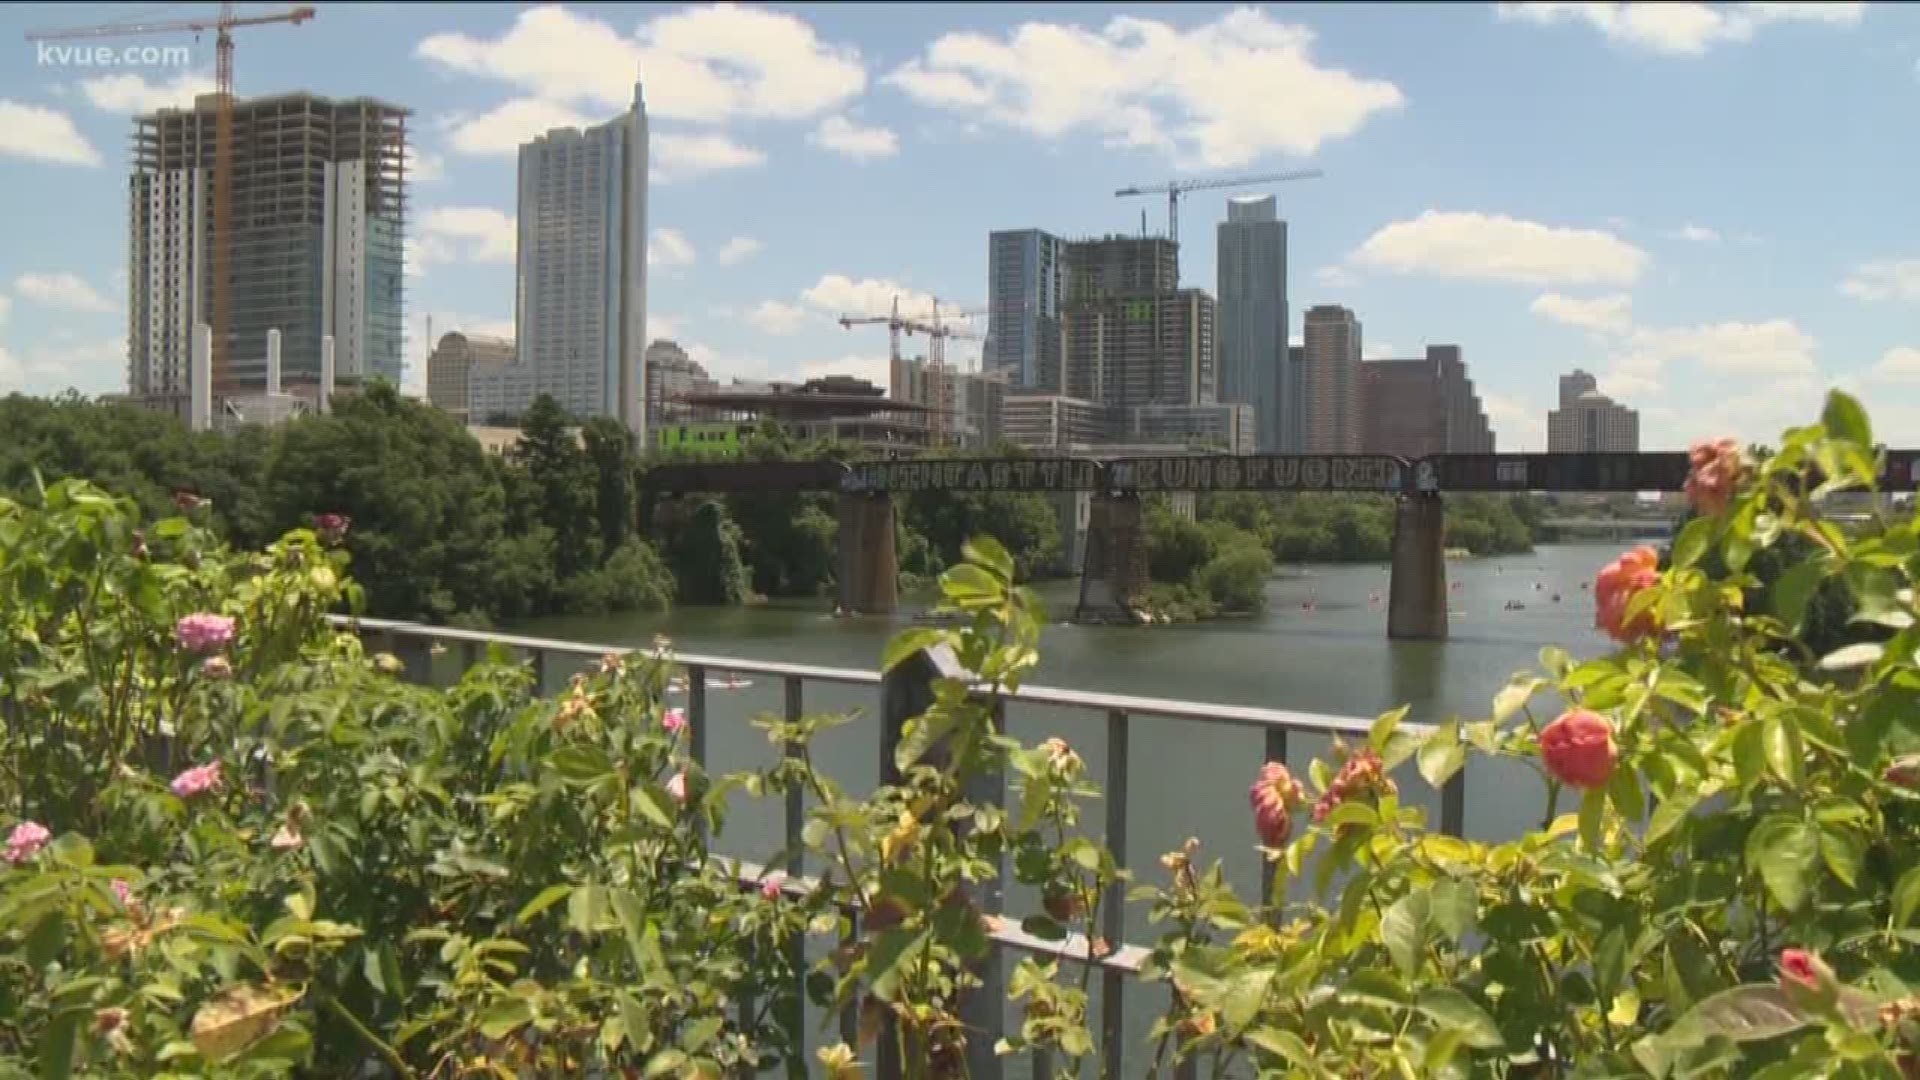 Austin, Texas the fastest-growing large city in U.S.